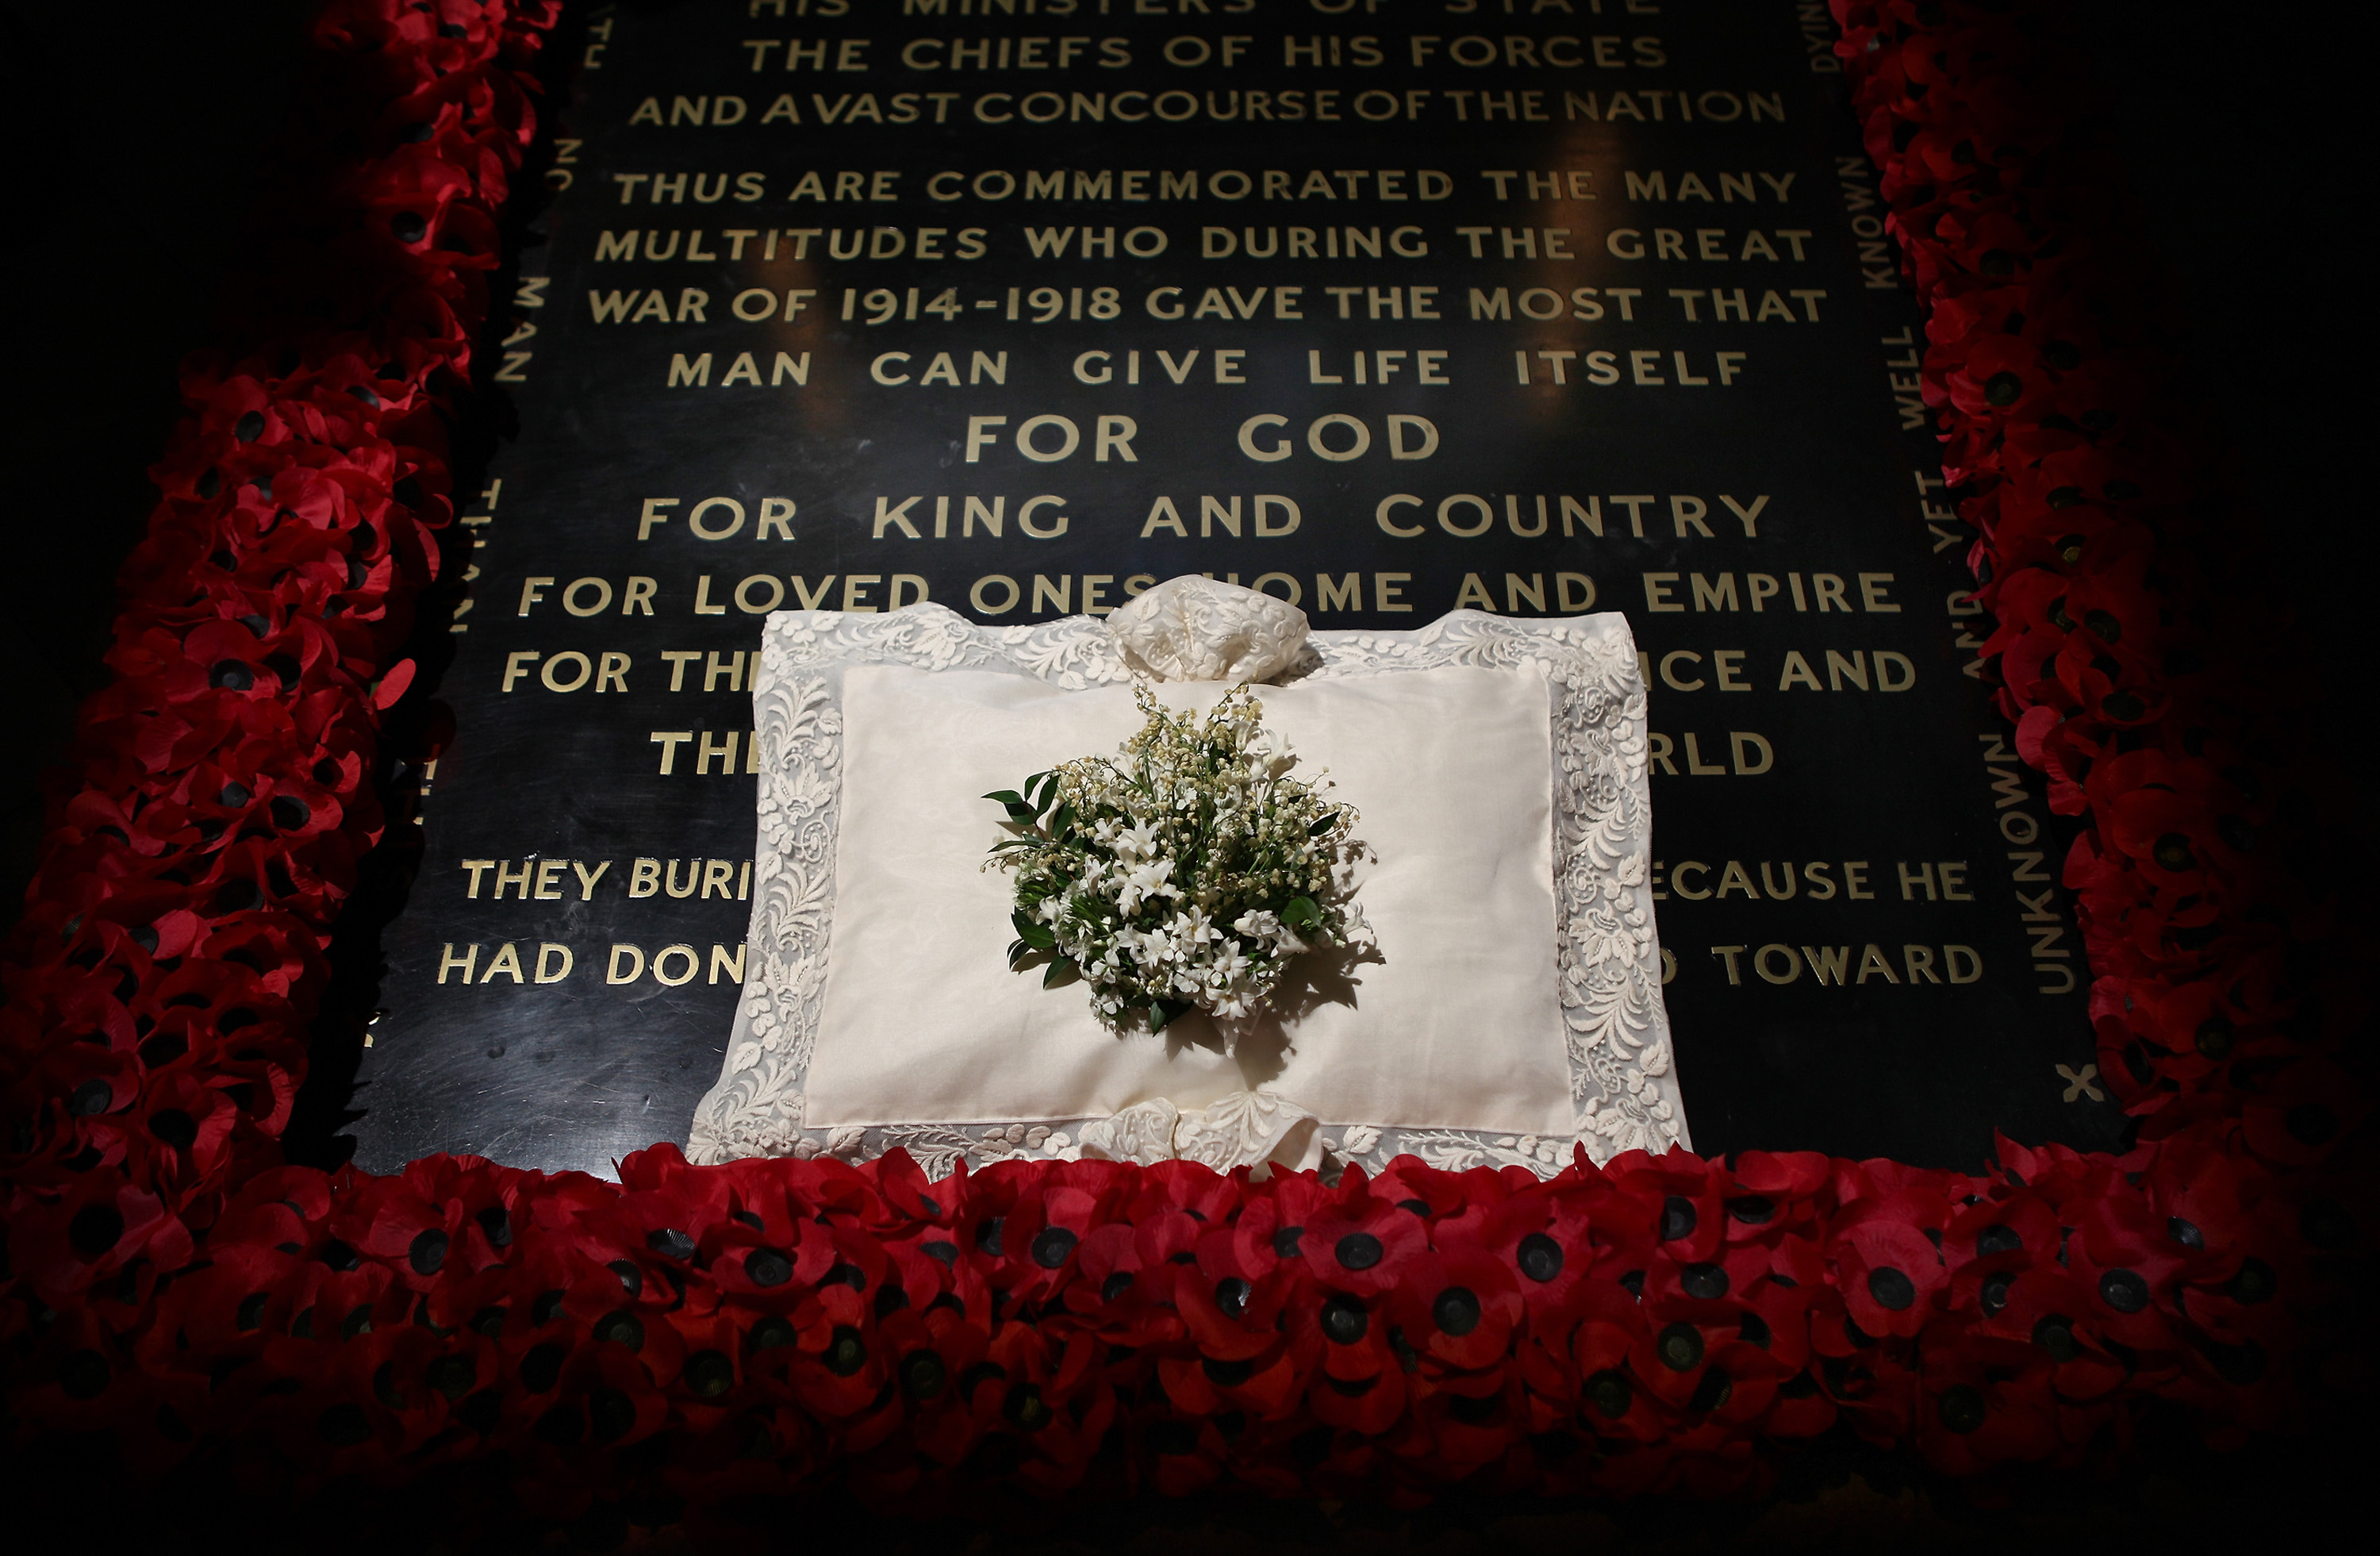 The wedding bouquet of Catherine, Duchess of Cambridge lies on the grave of the unknown warrior in Westminster Abbey on April 30, 2011 in London, England. (Peter Macdiarmid—Getty Images)